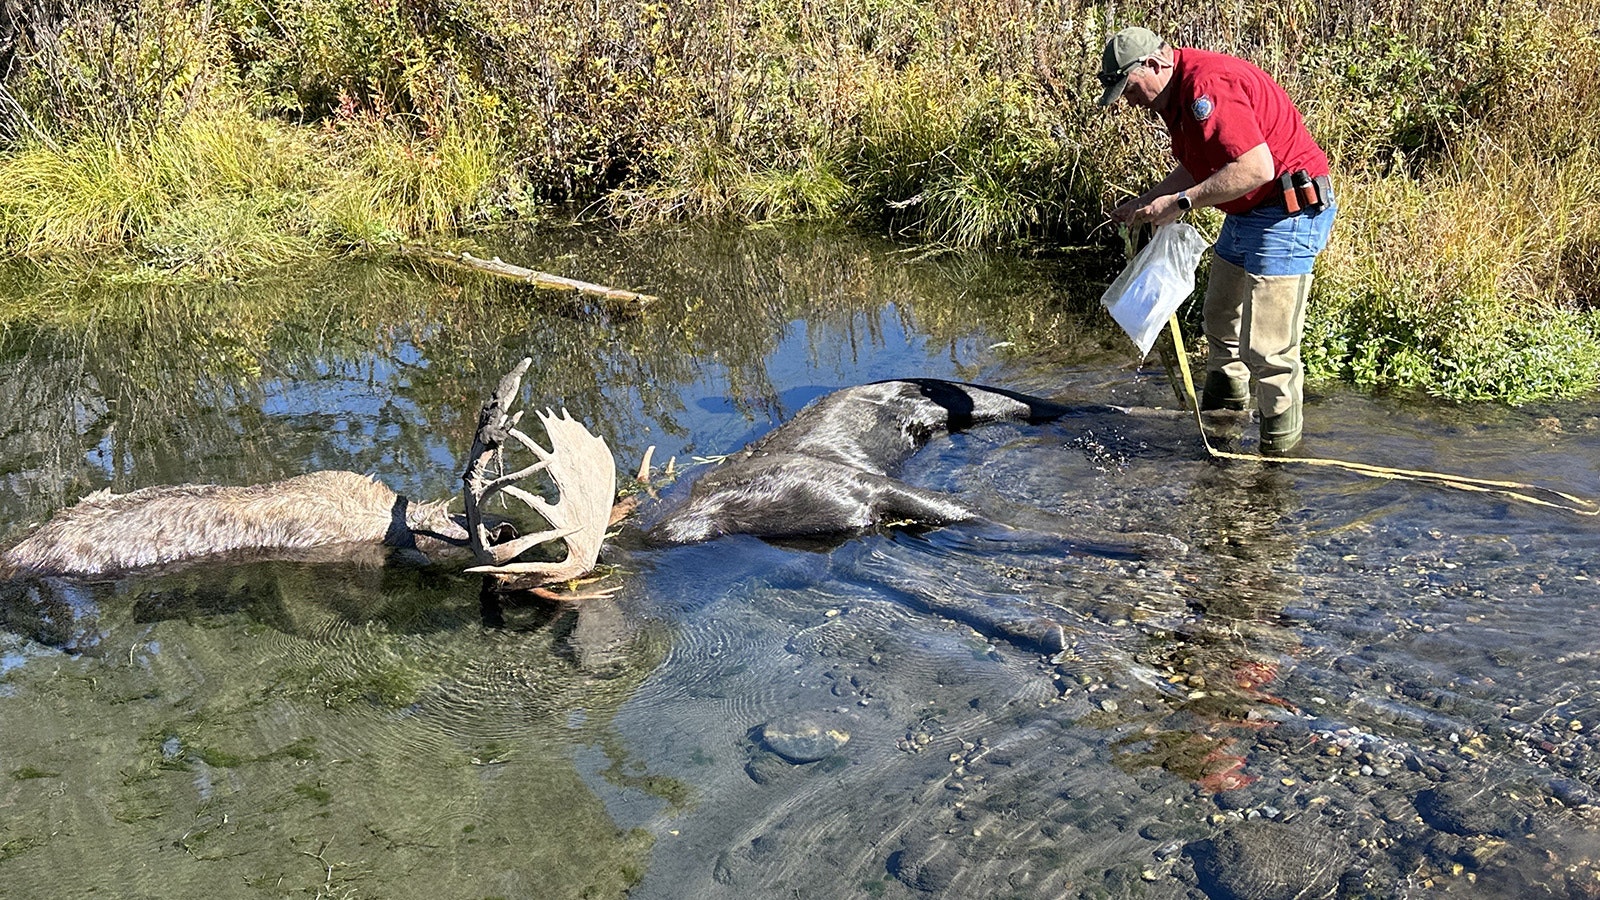 Wyoming Game and Fish Department South Jackson Game Warden Kyle Lash prepares to pull two mature bull moose with locked antlers from Fish Creek near Wilson.